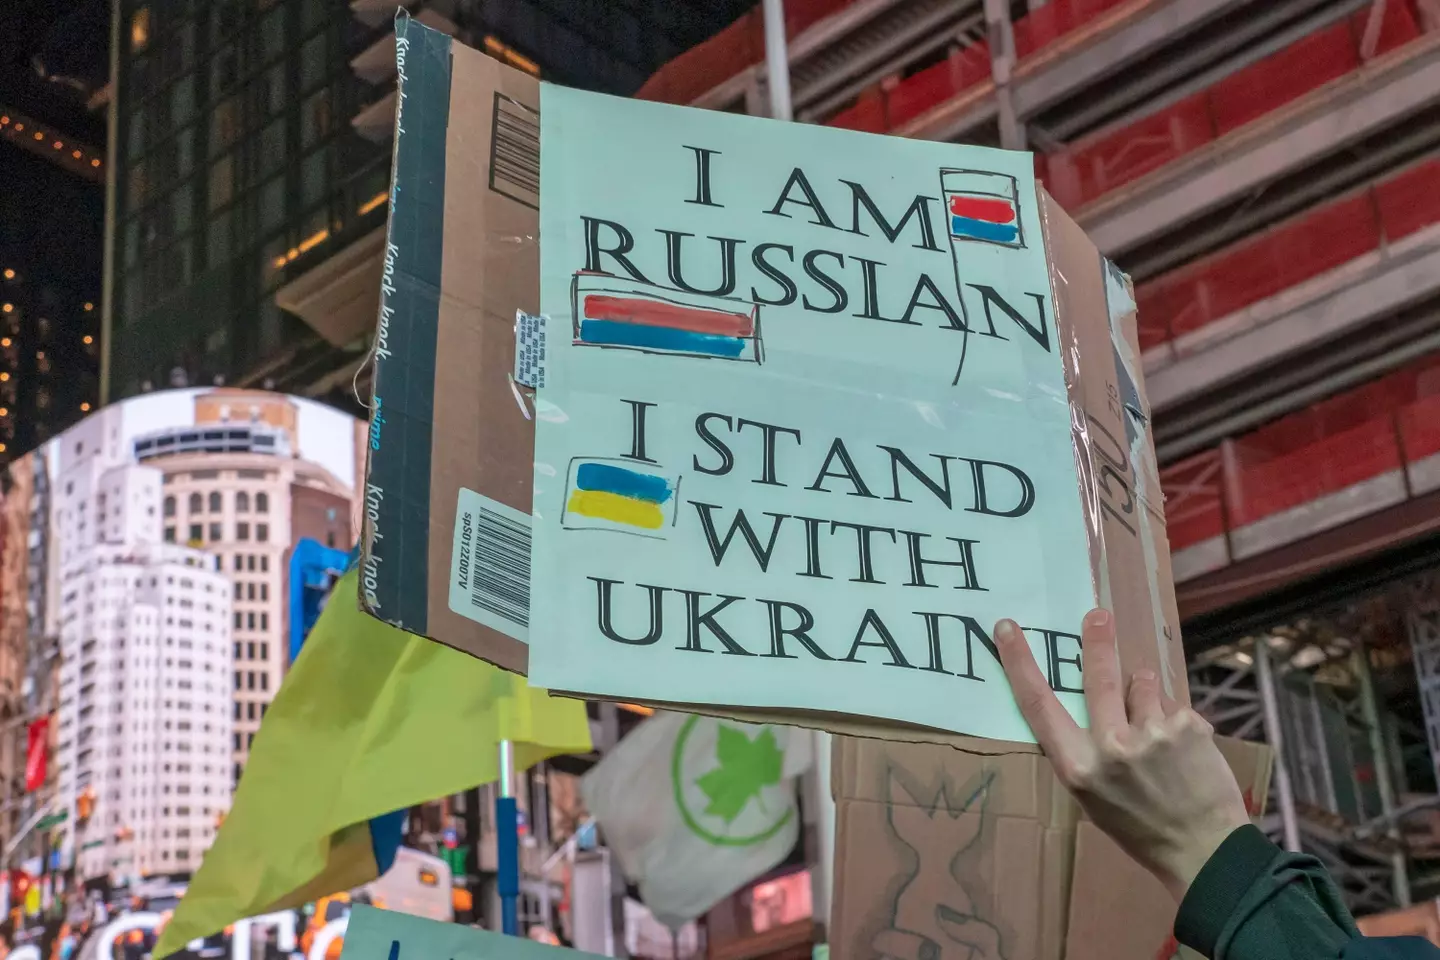 Russians have protested against Putin's war in Ukraine.